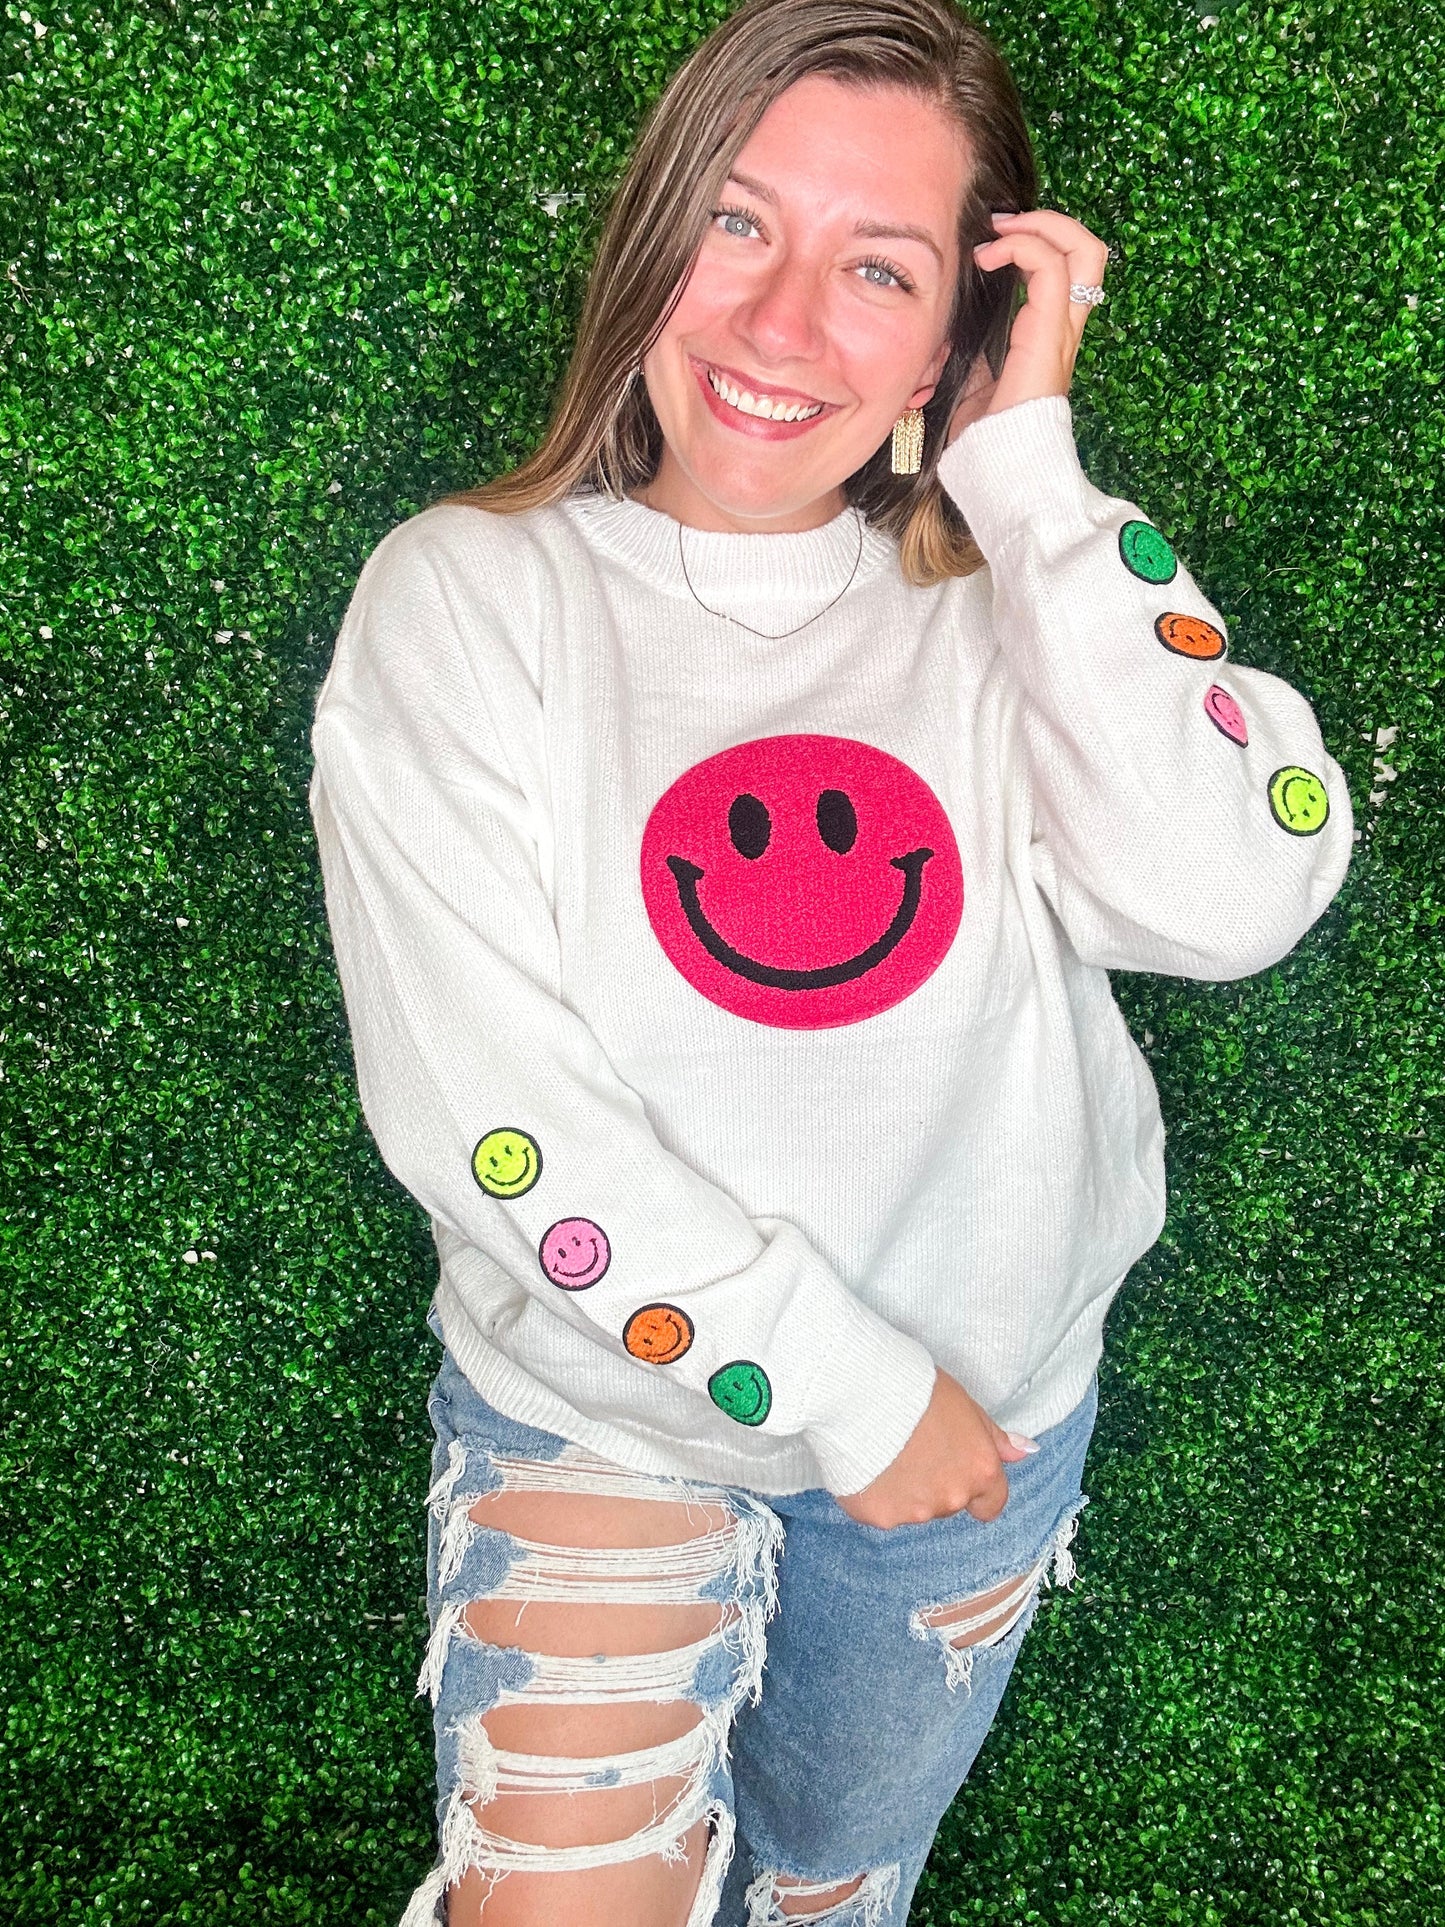 Smiley Patch Sweater